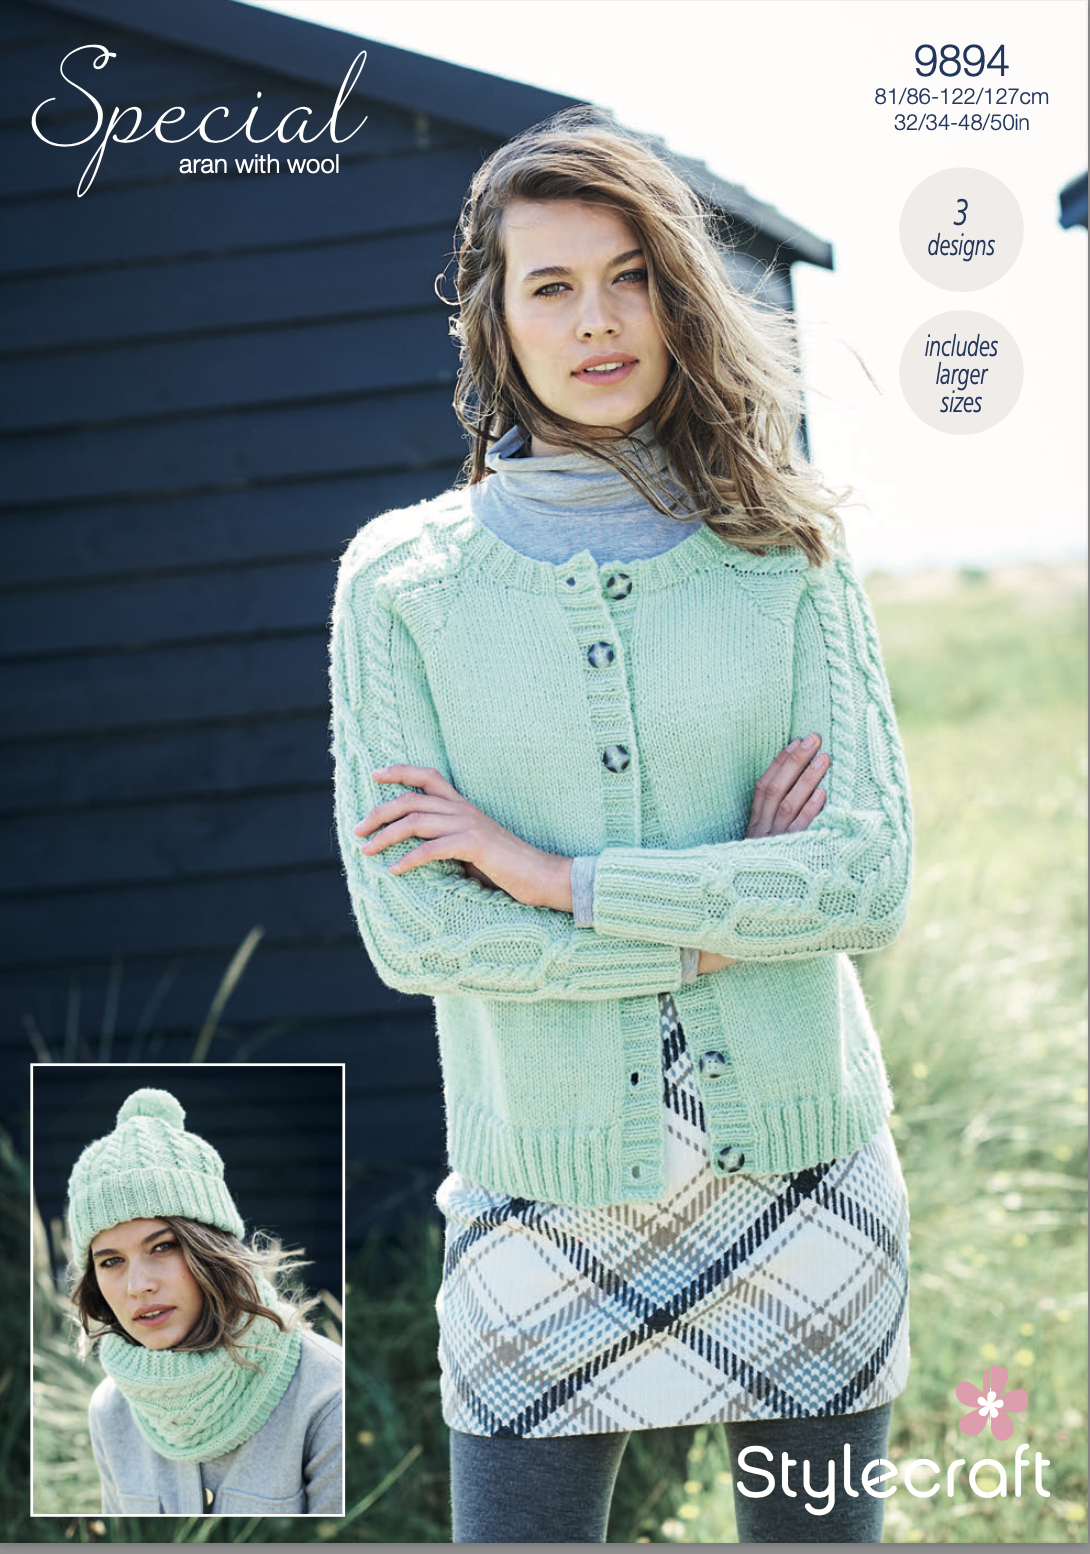 Stylecraft Pattern Special Aran With Wool 9894 (download) product image